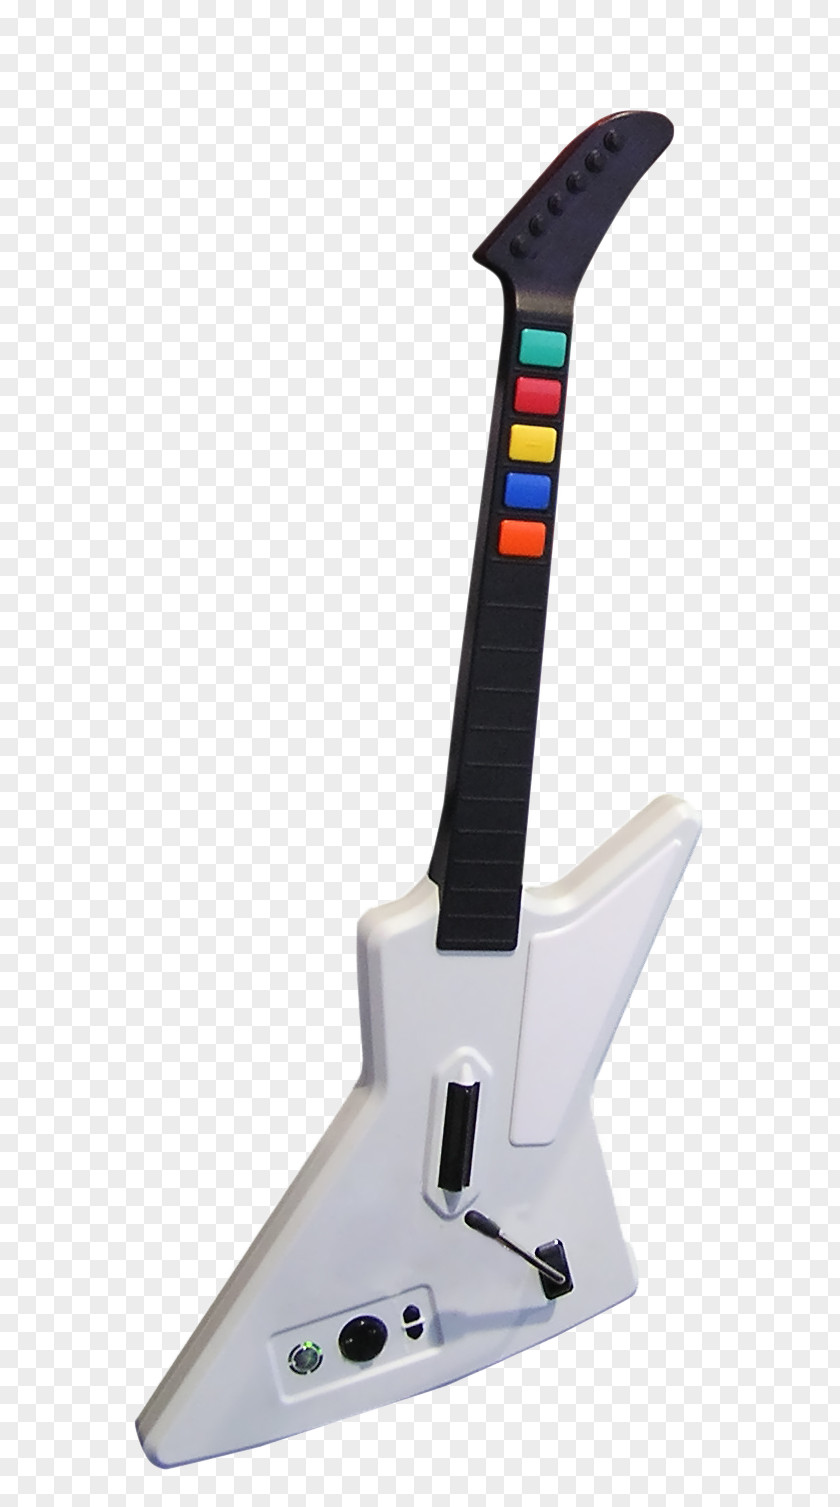 Physical Products Electric Guitar Joystick Download PNG